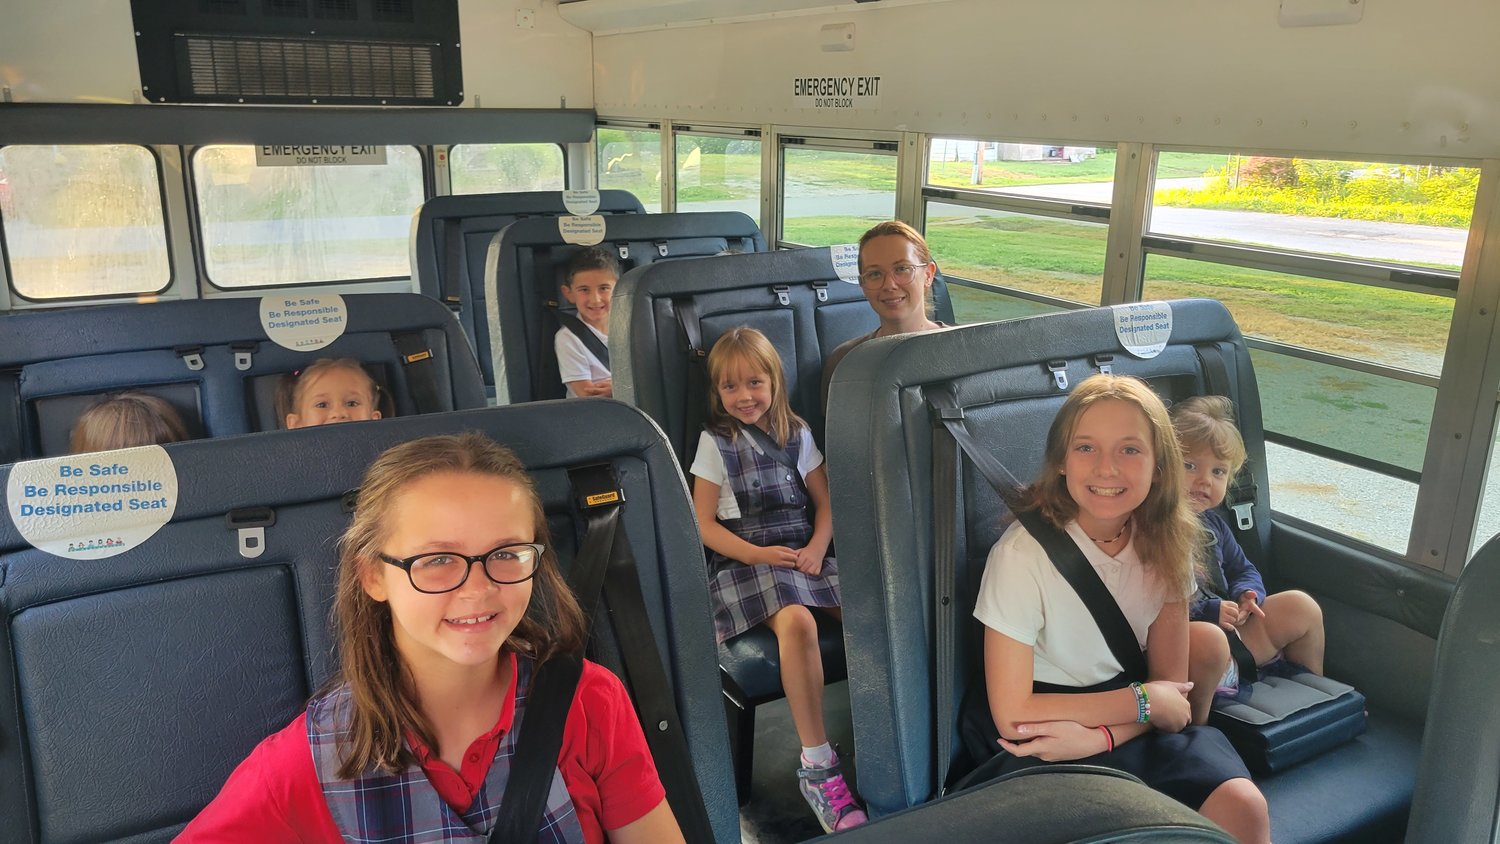 Member of the Flaspohler family in Fayette bought this specially outfitted bus and had it refurbished so their children and others could make the trip safely to and from St. Mary School in Glasgow each day.